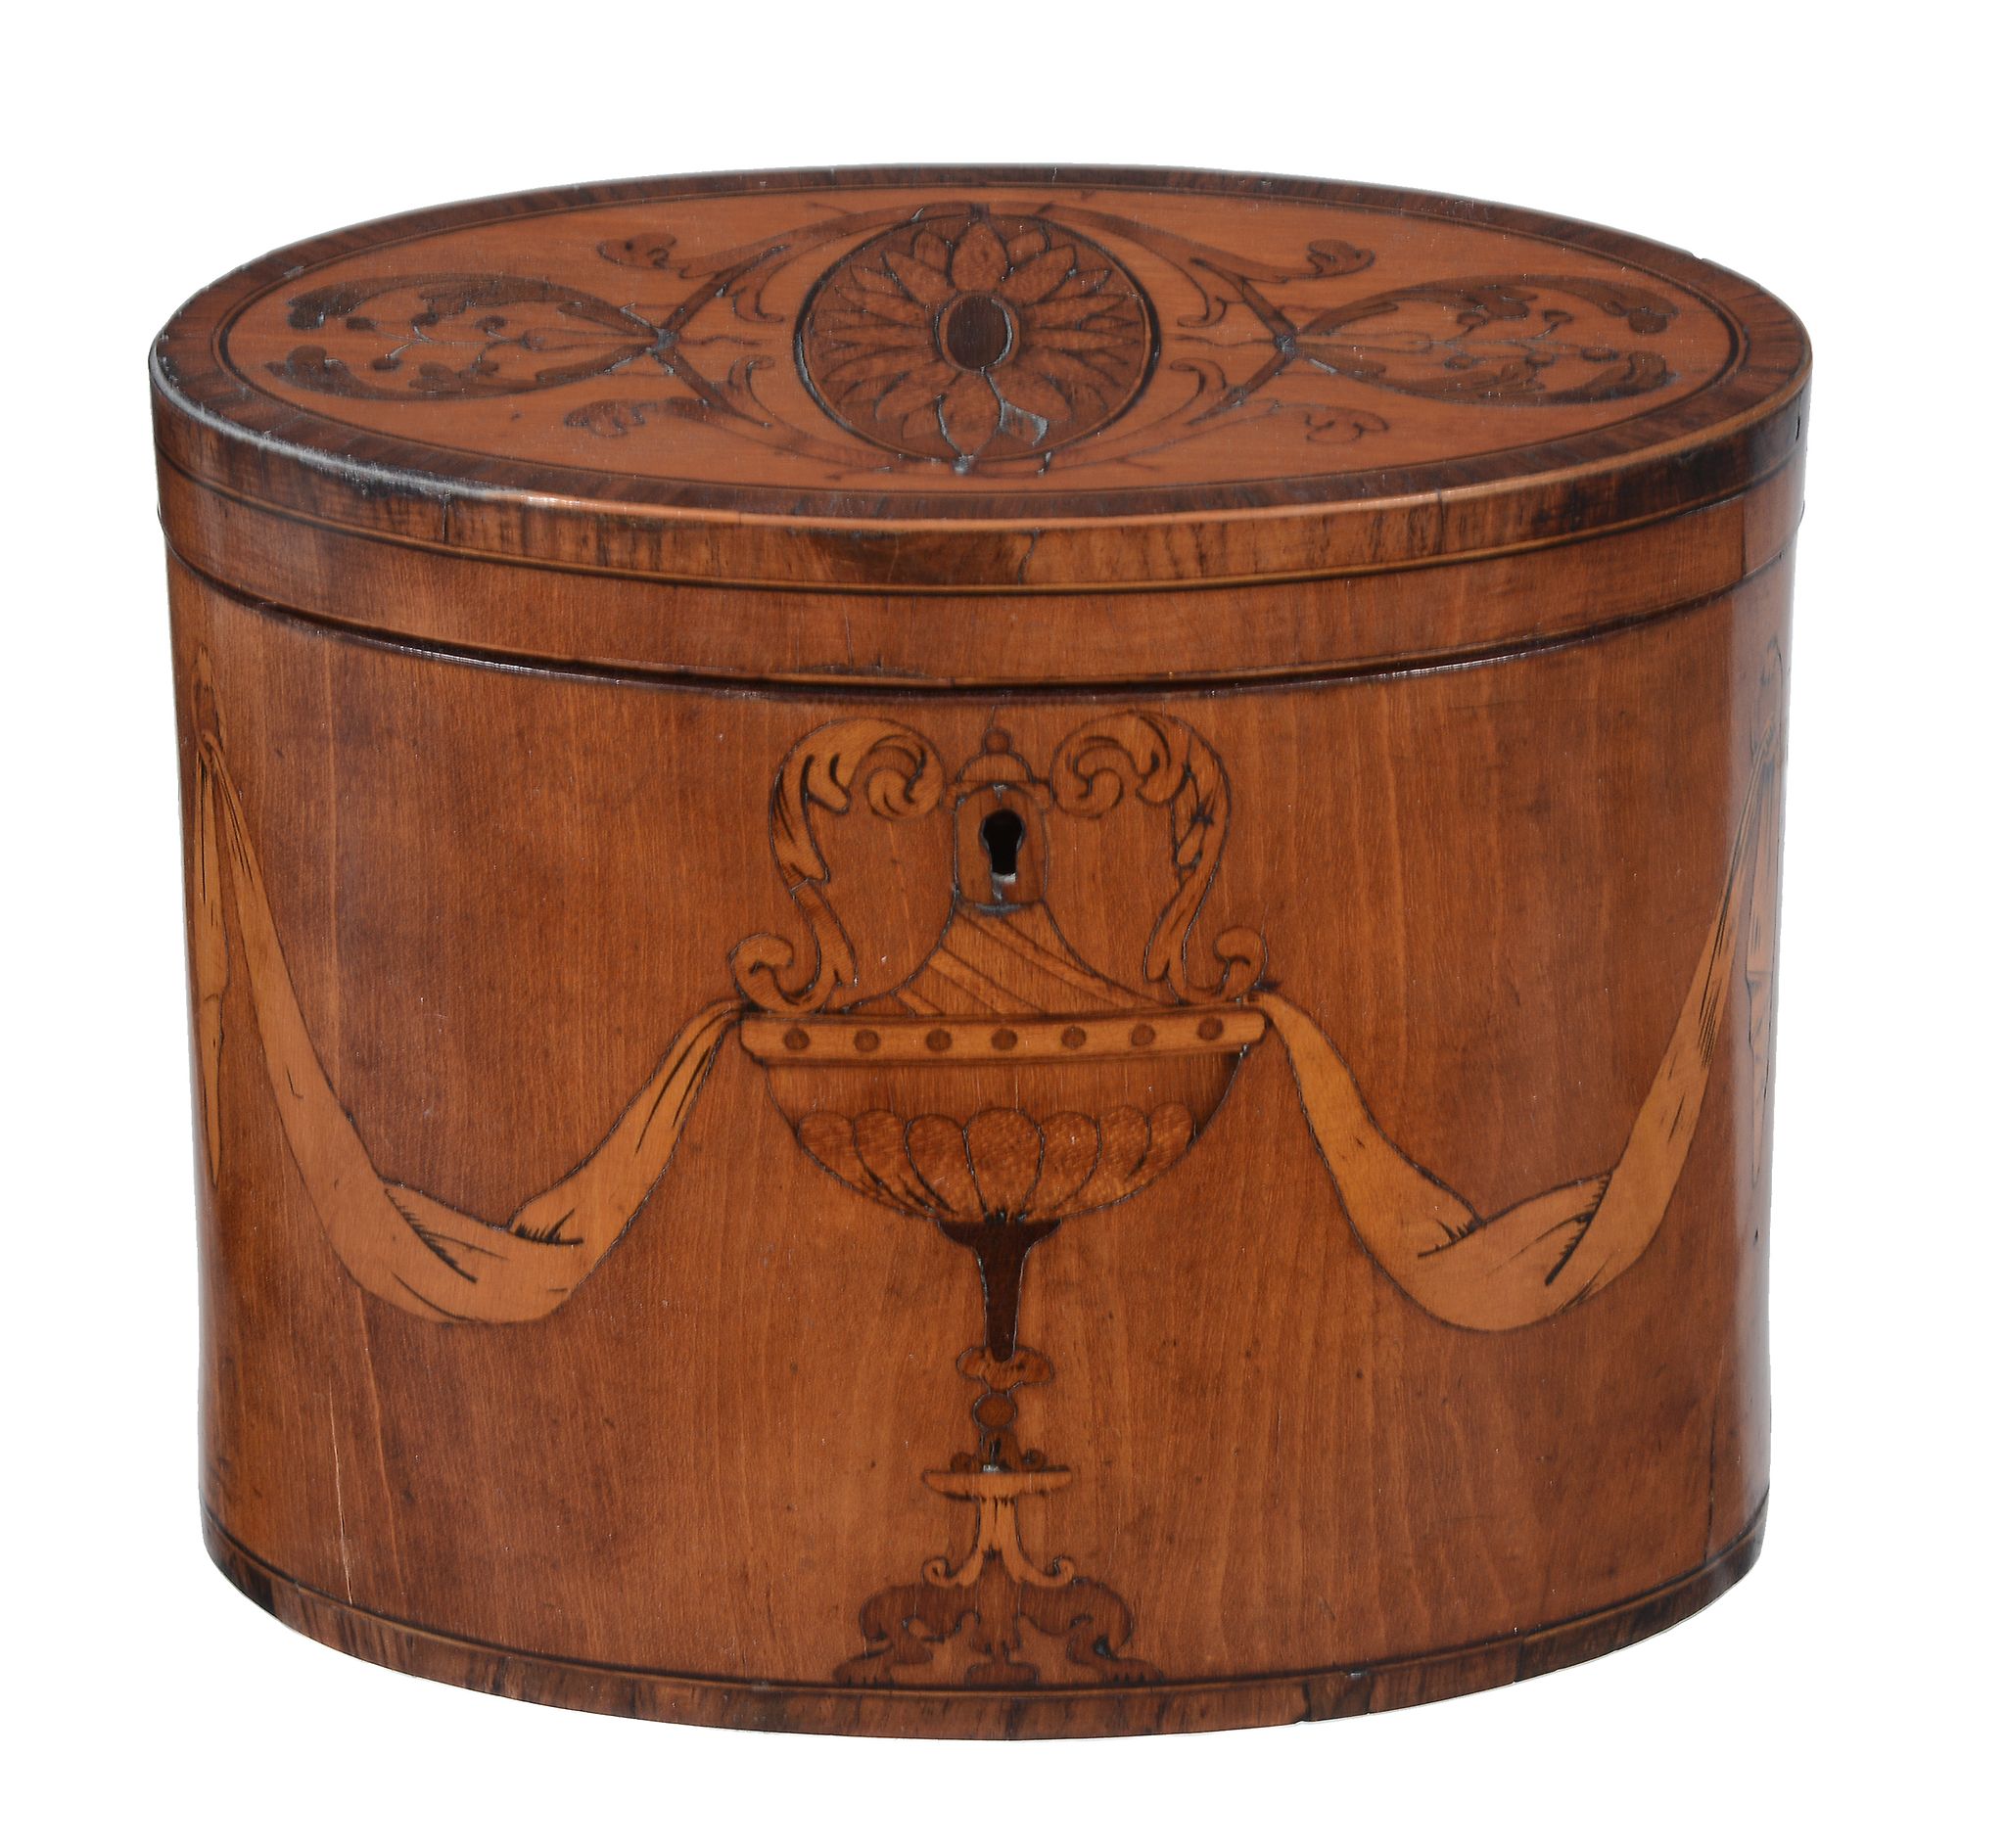 A George III satinwood and marquetry tea caddy, circa 1775, of oval section